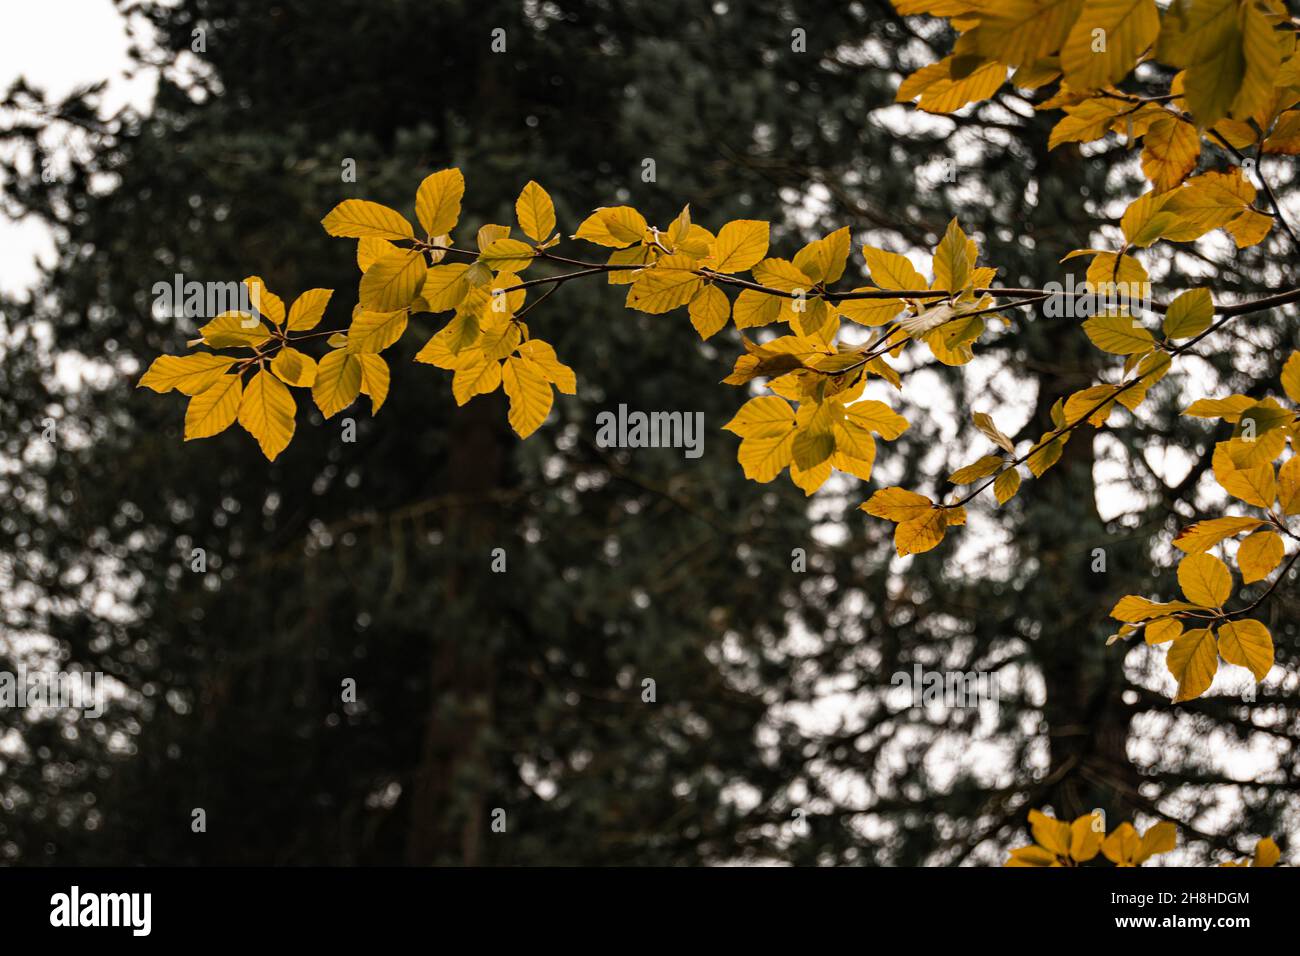 Yellow autum leaves on a branch standing out from a background of darker evergreen trees, isolated colorful autumnal leaves. Stock Photo